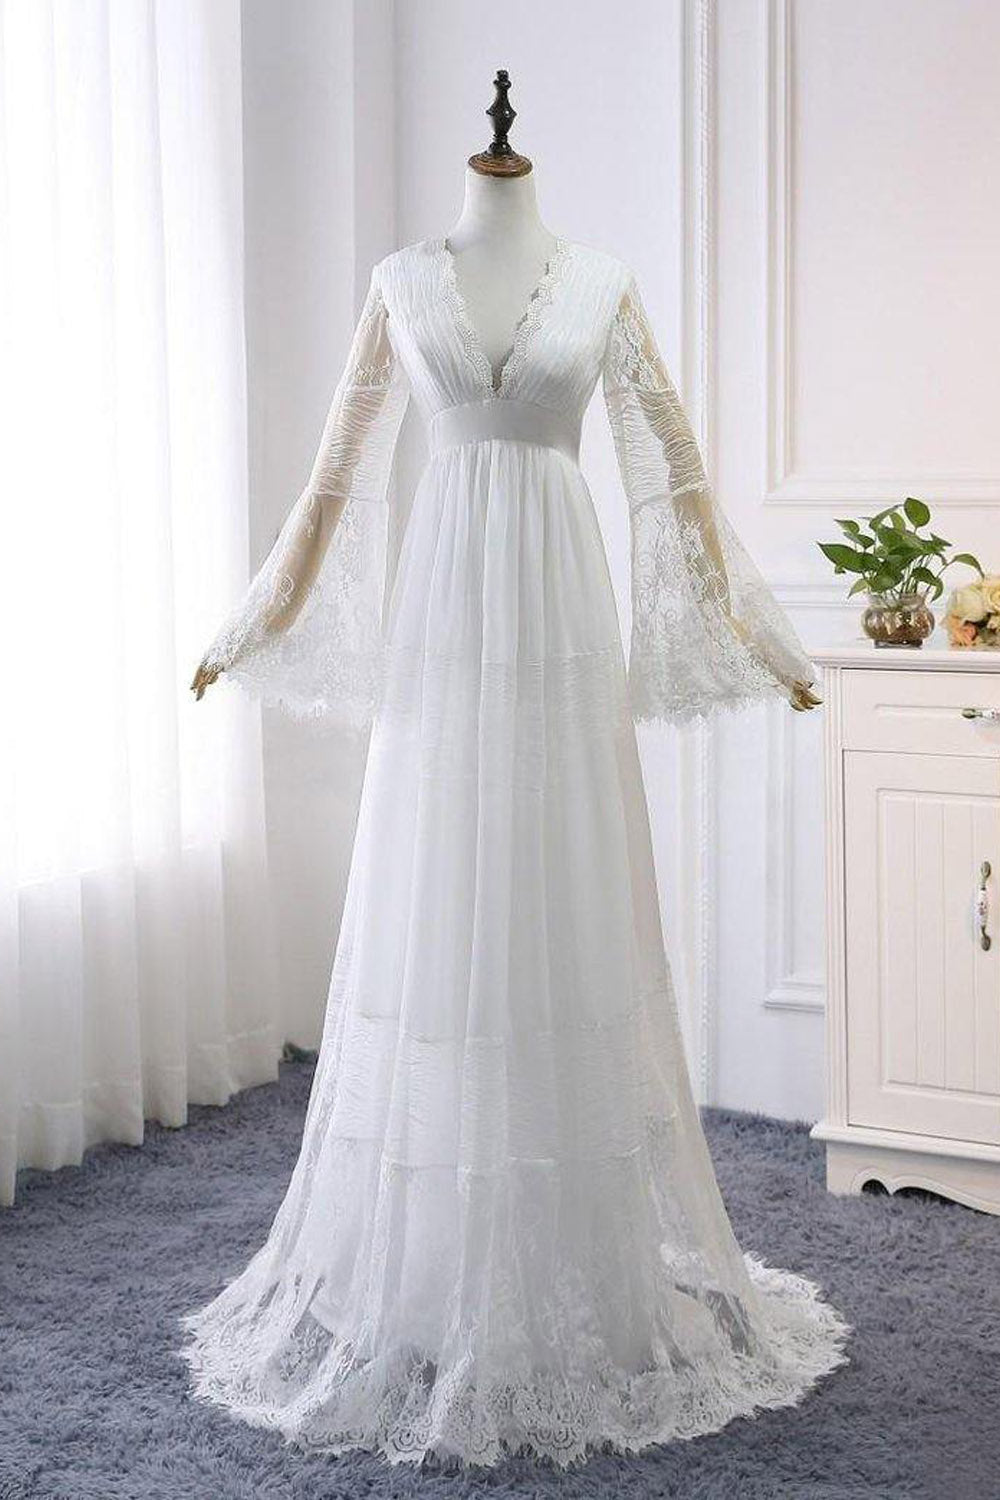 A-line Long Sleeve White Lace Wedding Dress Rustic Bridal Gown,WW218